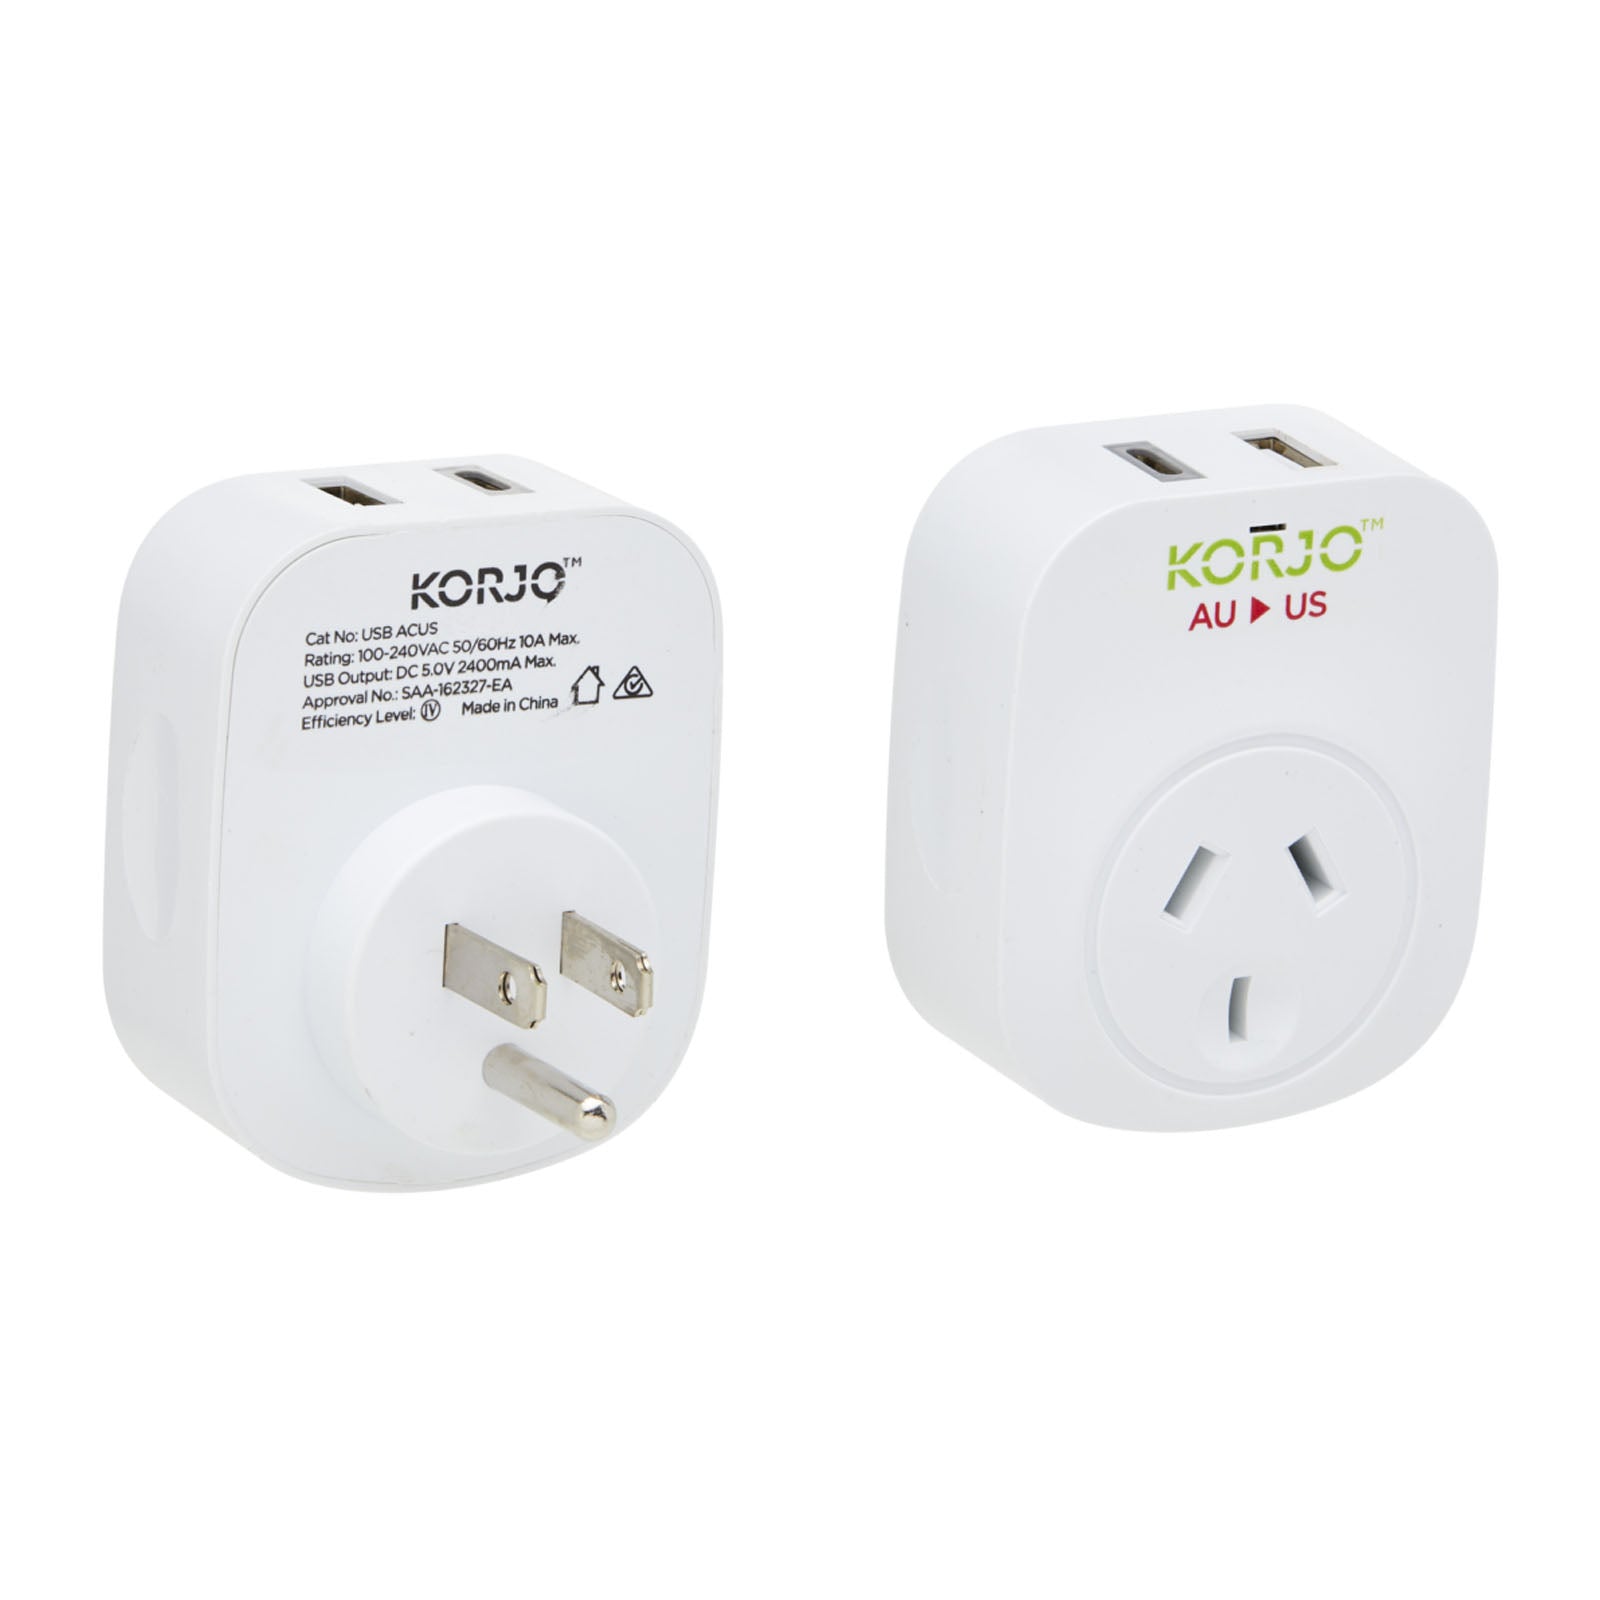 Korjo-Travel-Adaptor-Usb-Port-A-And-C-Australia-To-Us-Front-Back